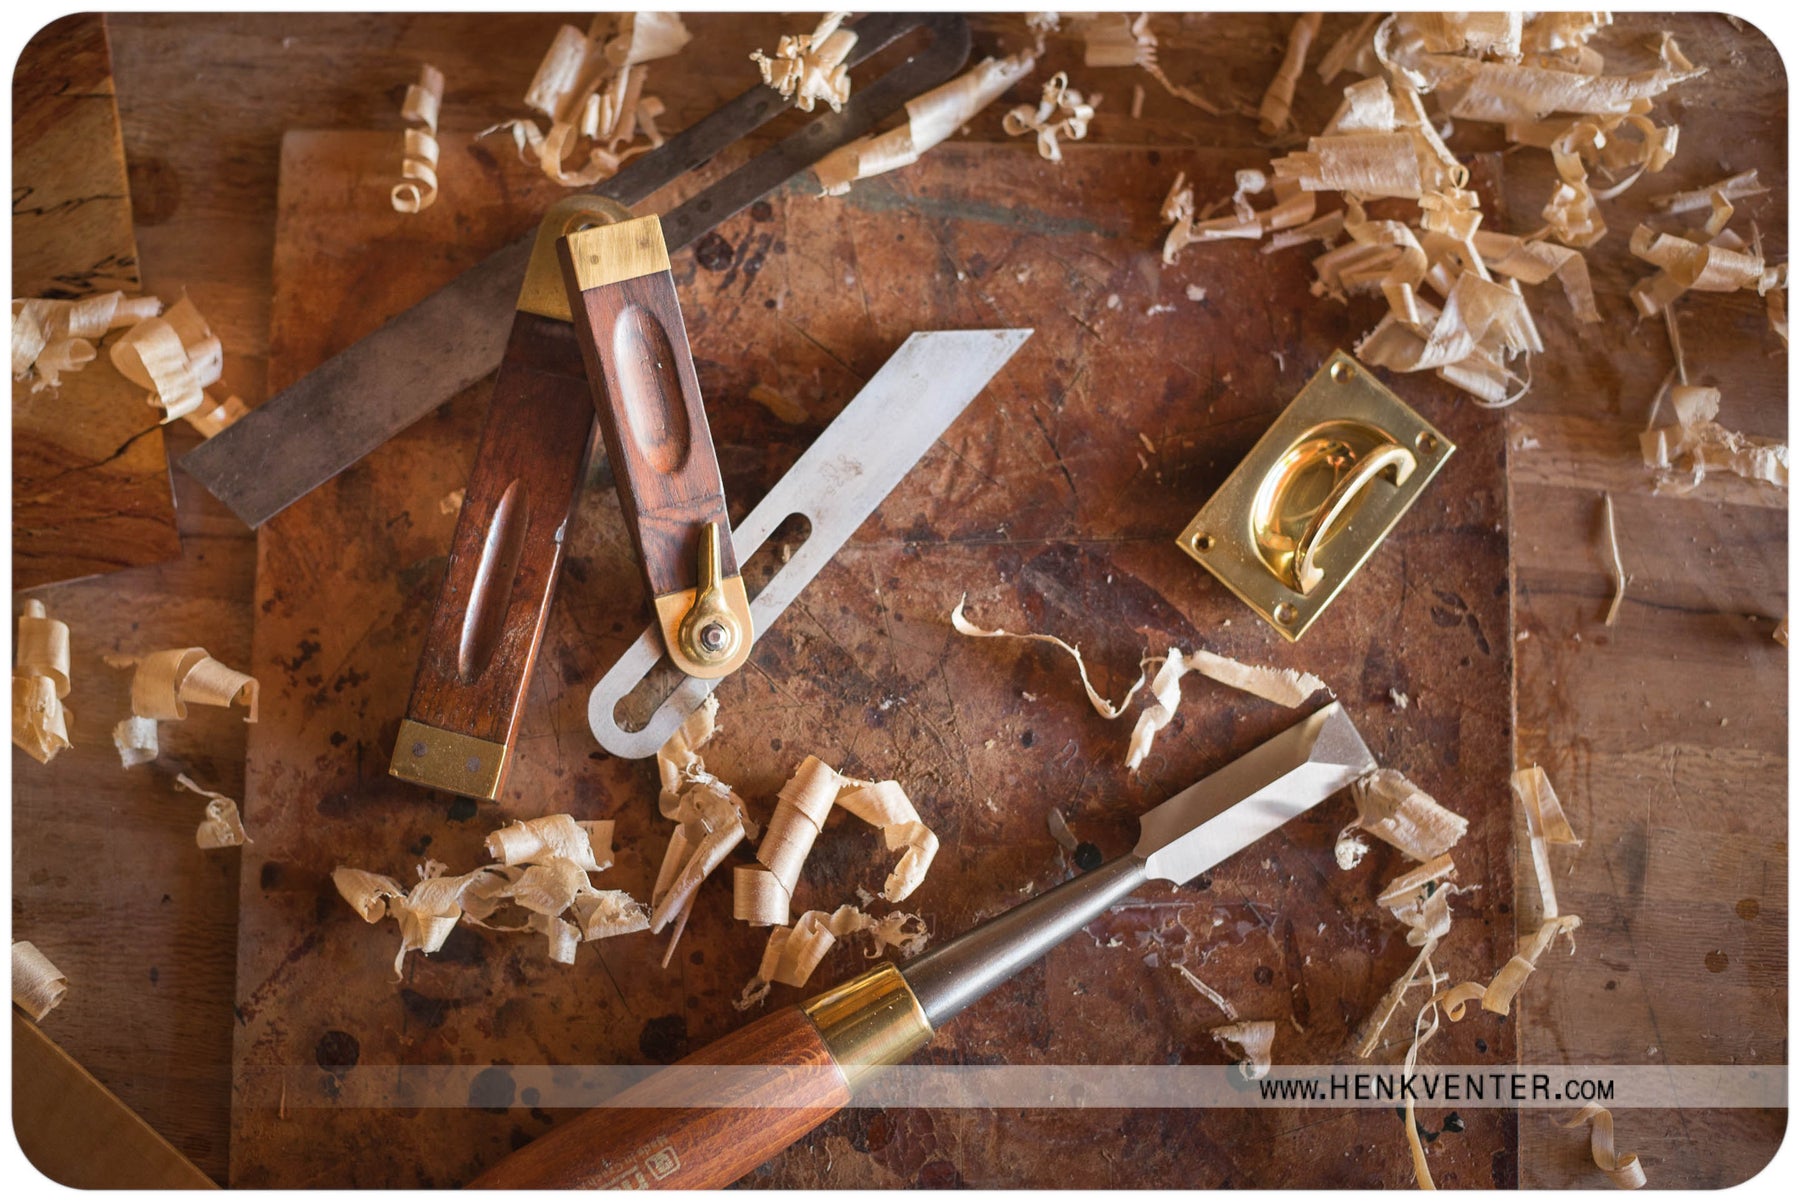 What sets us apart as Hand Tool Woodworkers?